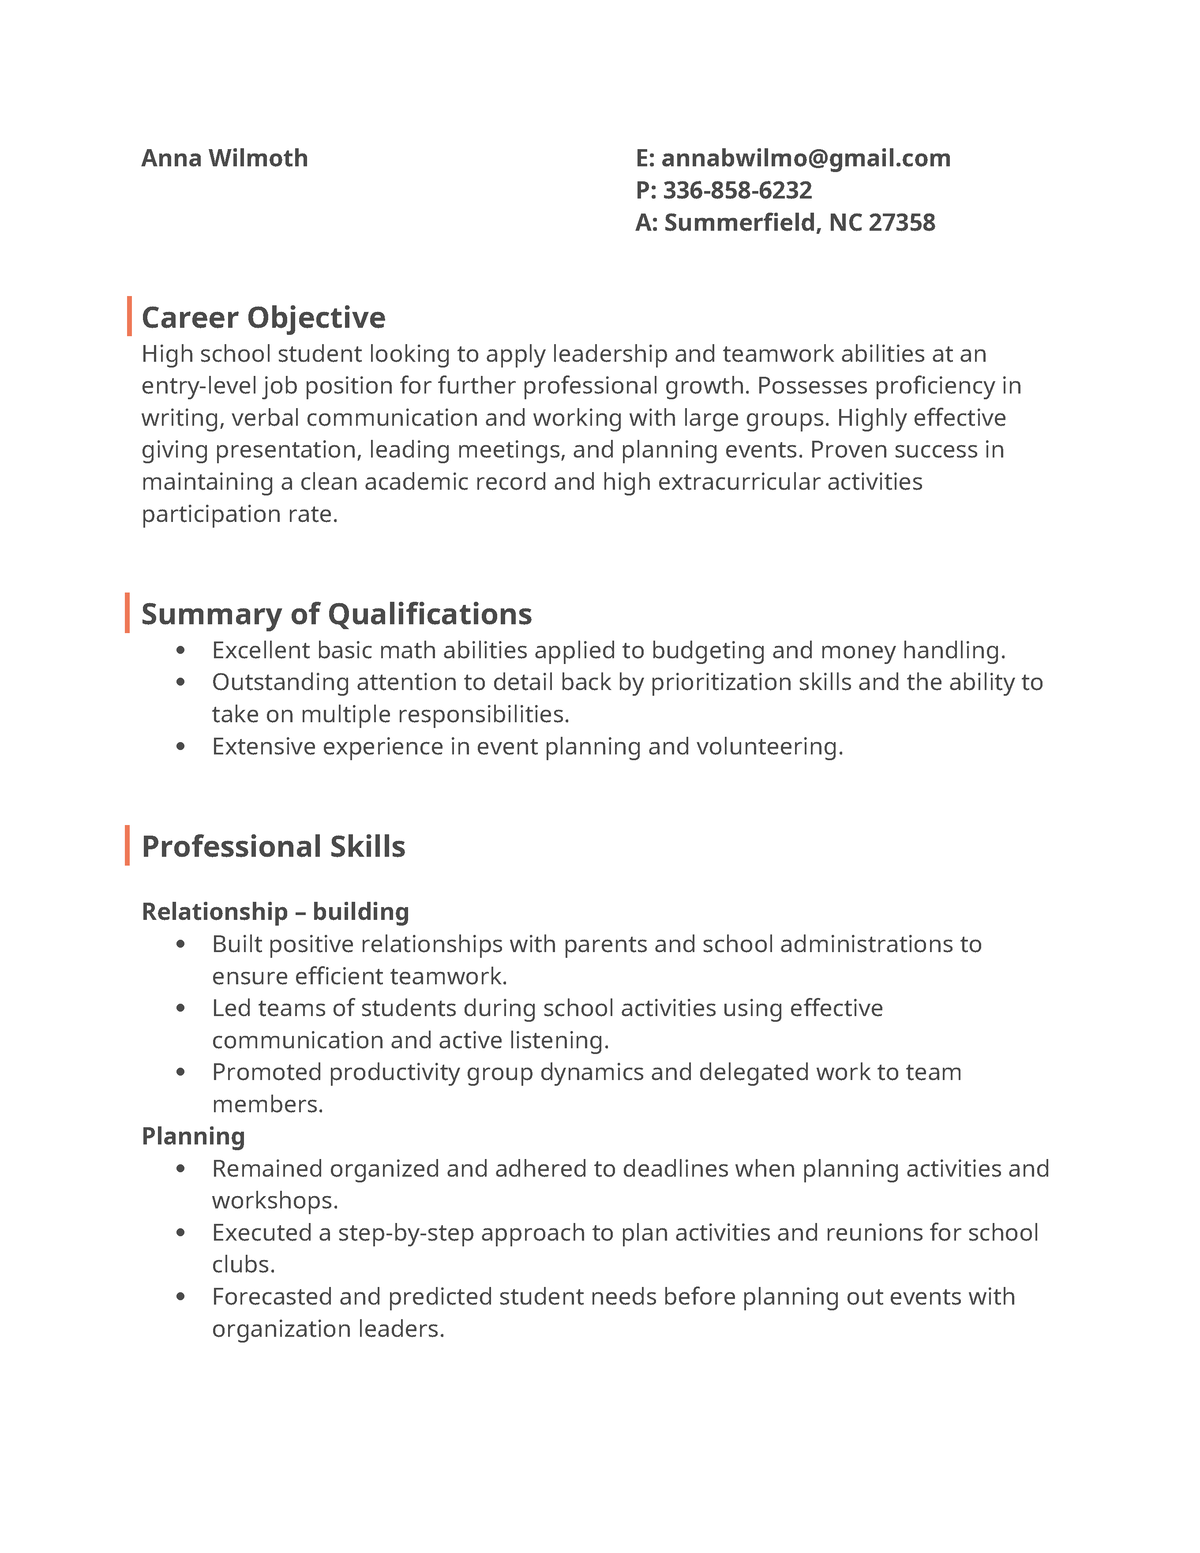 Resume example for job - Anna Wilmoth E: annabwilmo@gmail P: 336-858- A ...